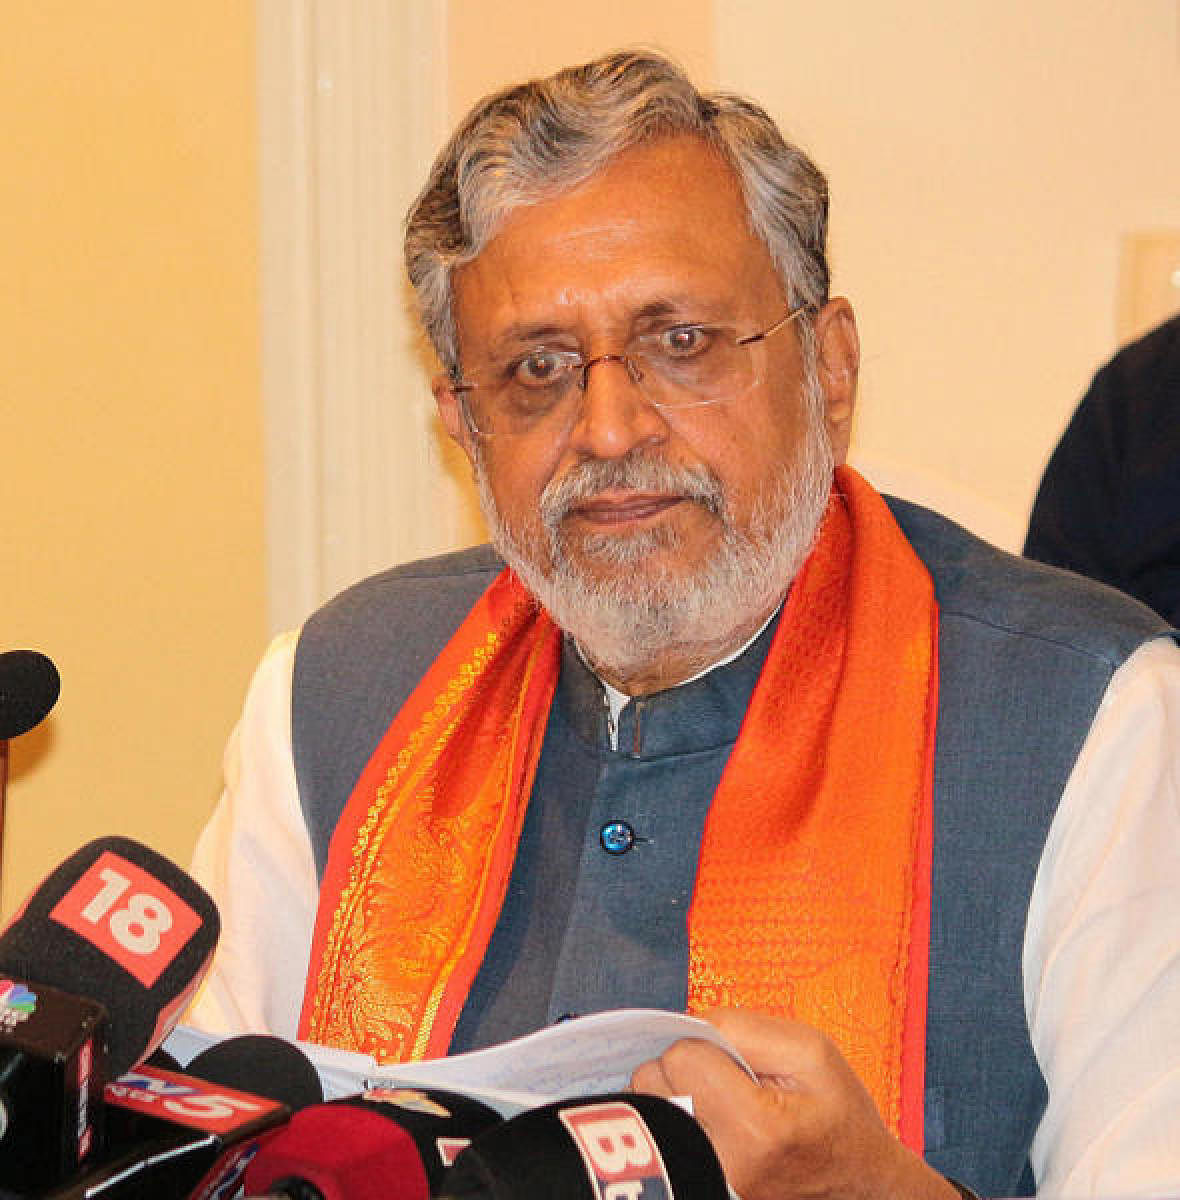 On GSTN glitches, Sushil Modi said that the complains on GST Seva Kendras have reduced by 80% since GoM held its first meeting.